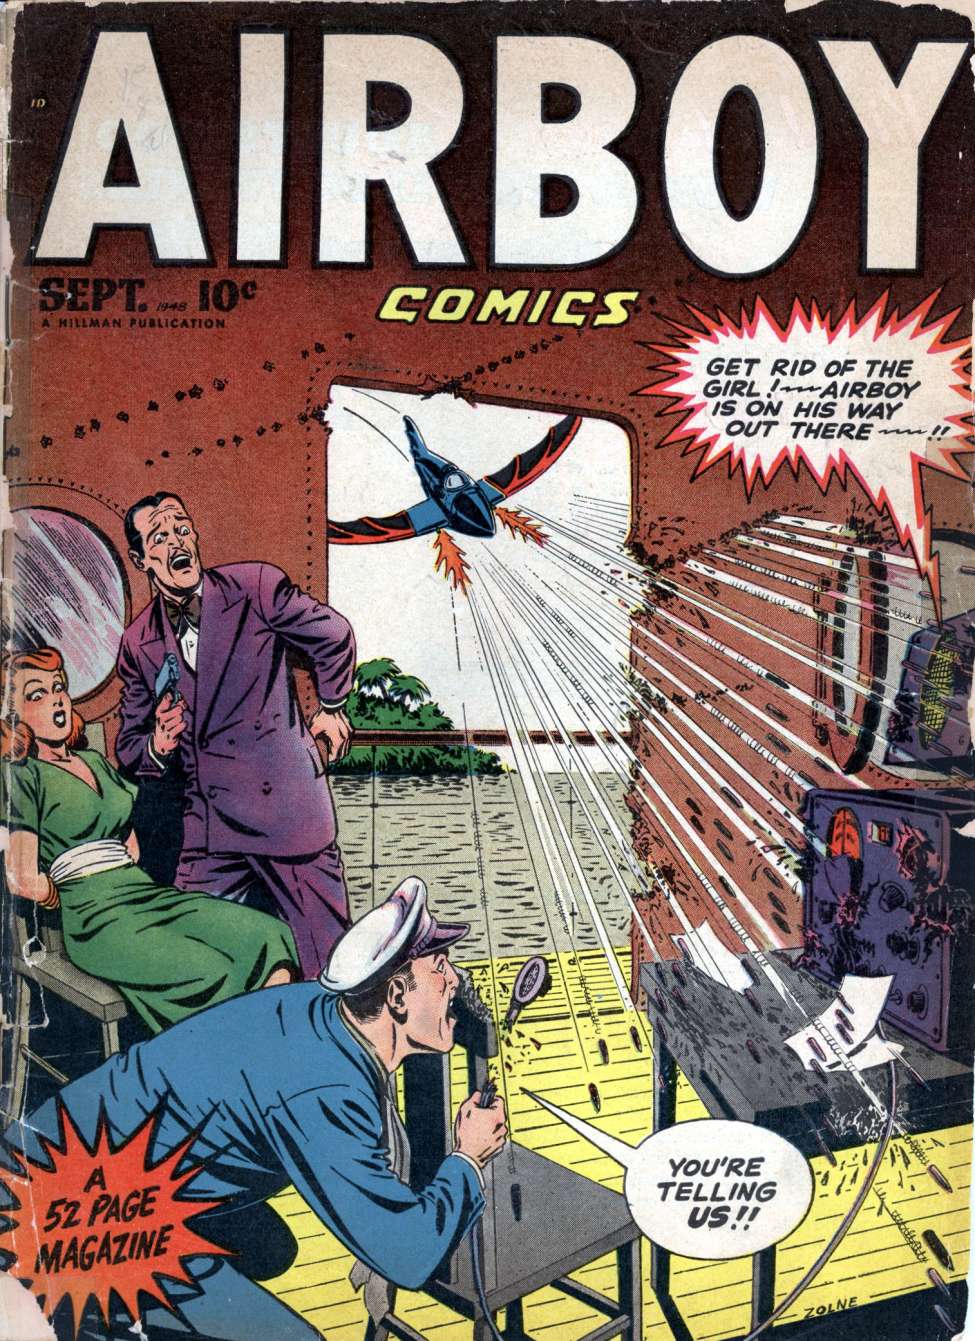 Book Cover For Airboy Comics v5 8